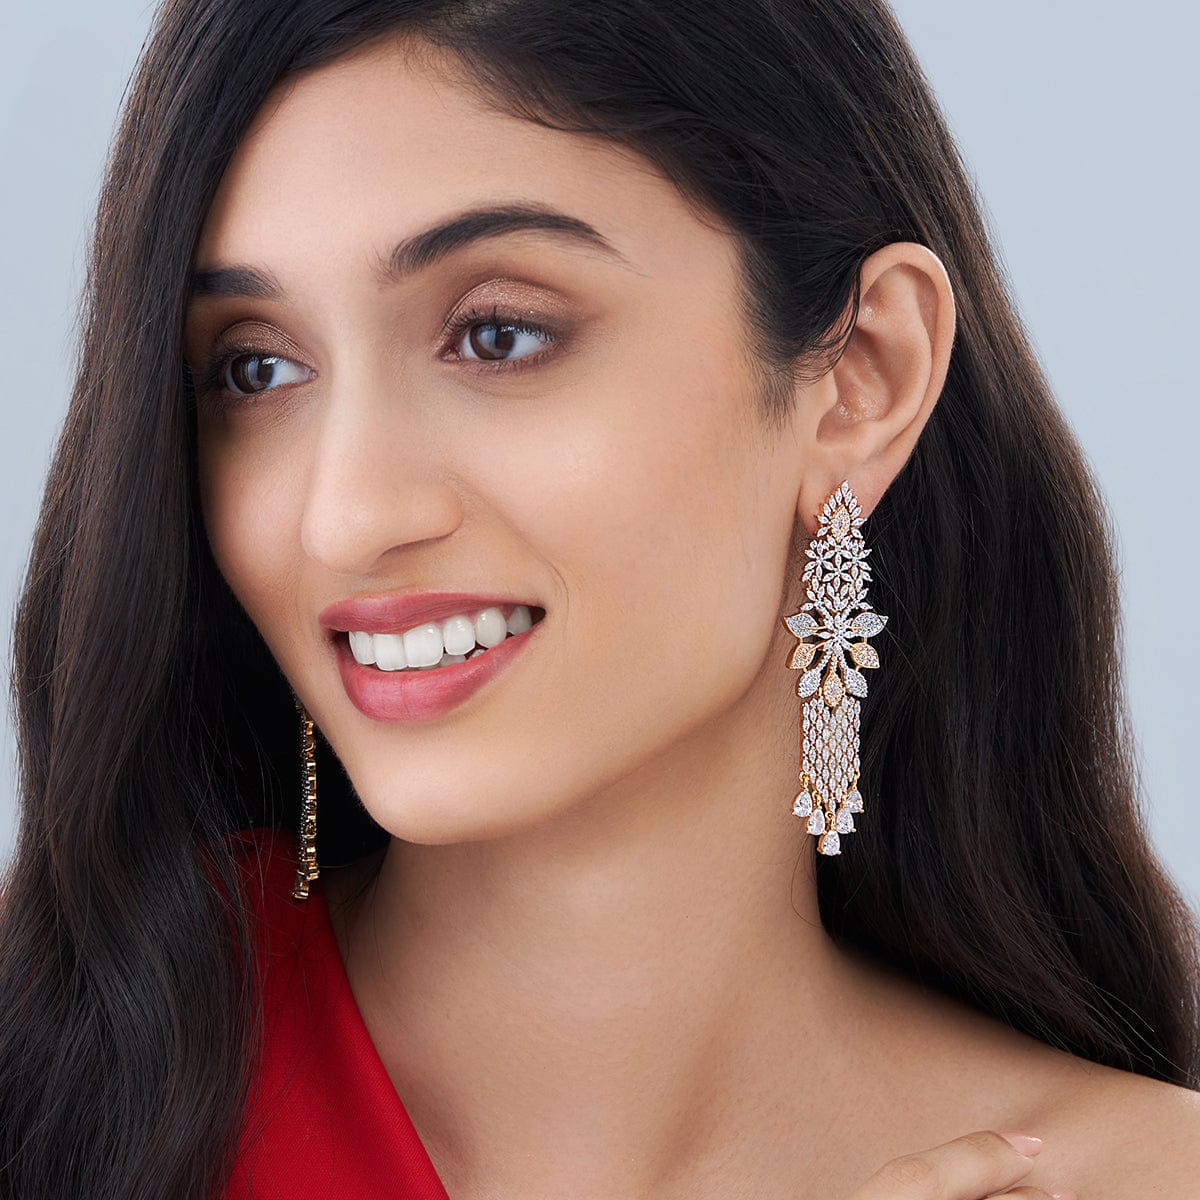 What is the best way to match earrings with dresses in different colors  (black, white, red)? - Quora